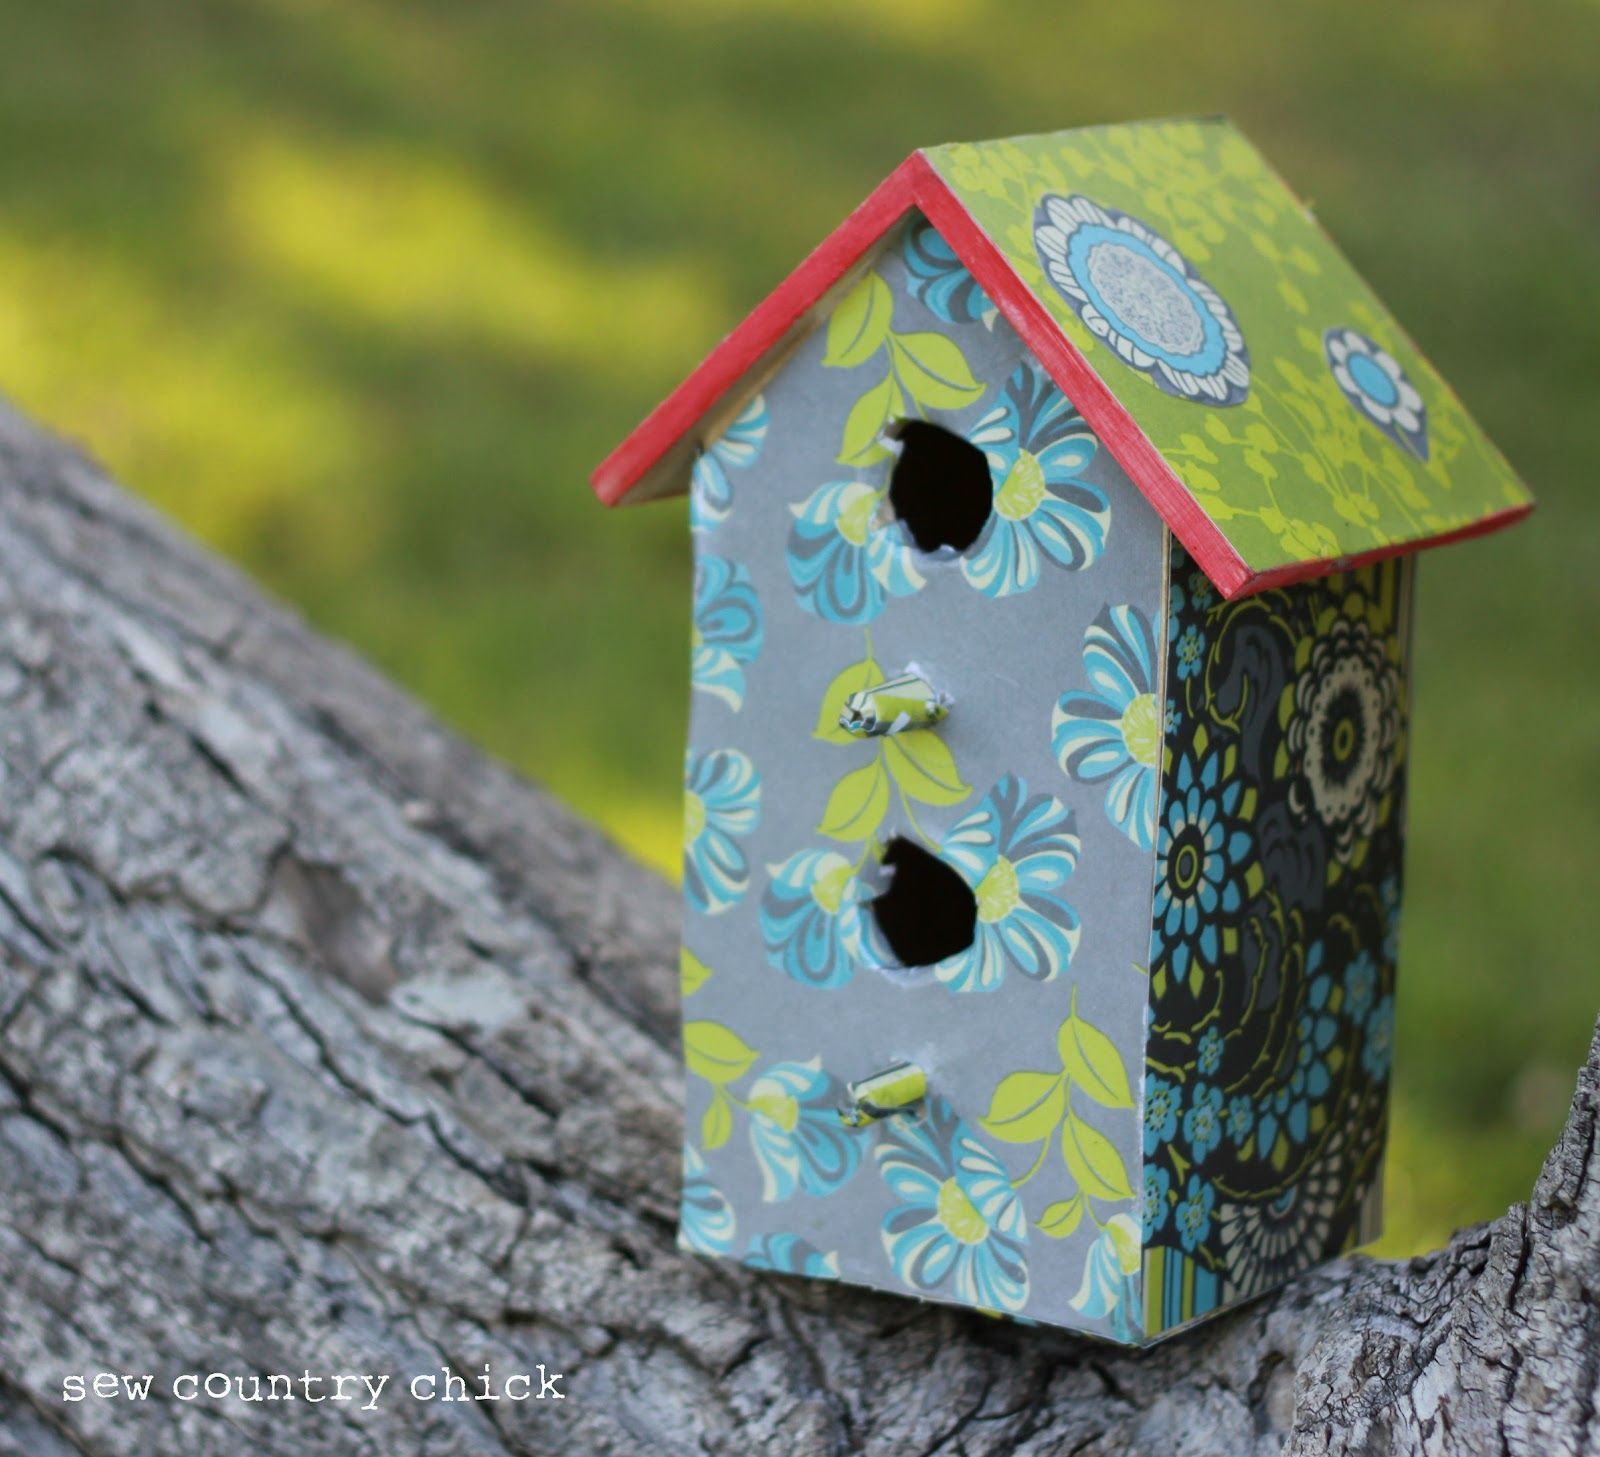 Sew Country Chick- Farmhouse Couture: Mod Podge a Birdhouse! Spring Crafts With